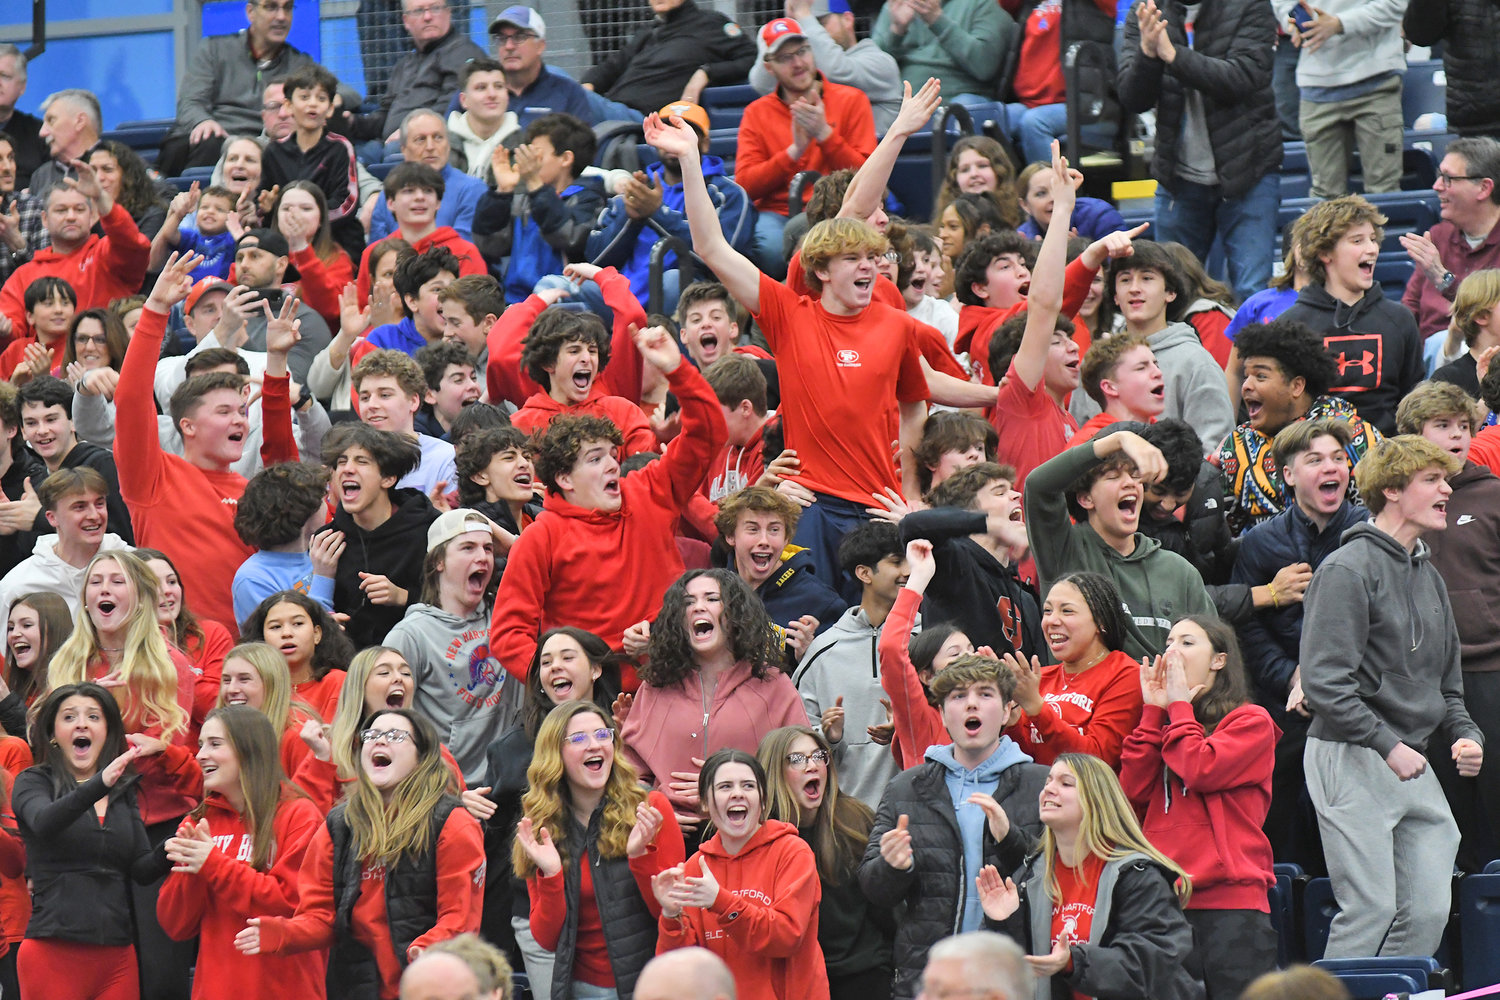 New Hartford student section celebrate a basket close to the end of the Section III Class A final against Central Square on Sunday night at OCC in Syracuse.